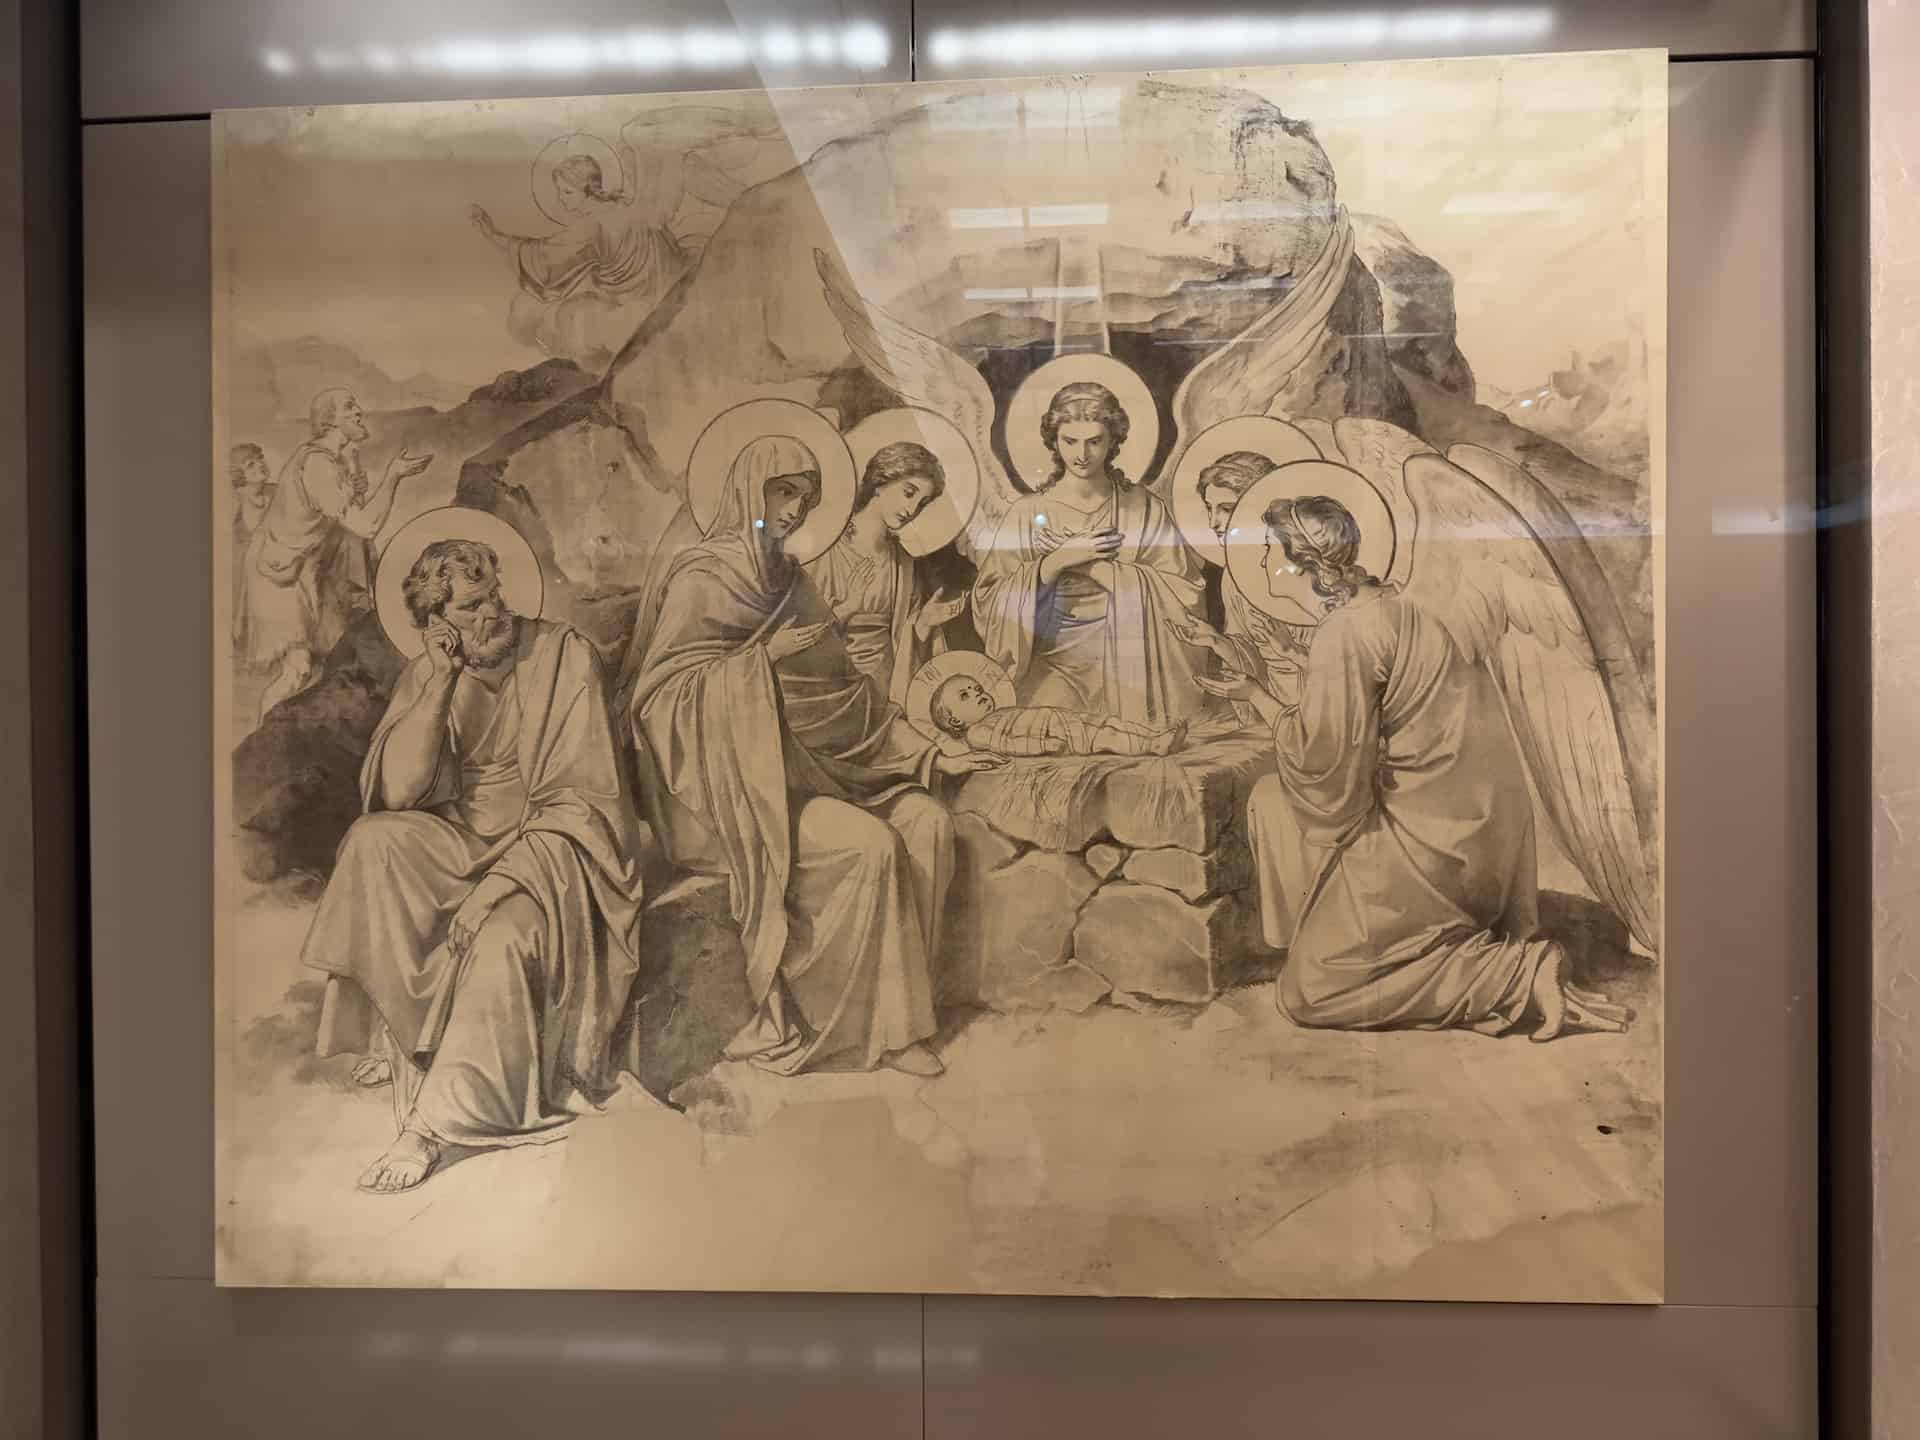 Sketch in charcoal with the depiction of the Nativity, painted by Ludwig Thiersch, 19th century at the Byzantine Museum in Athens, Greece